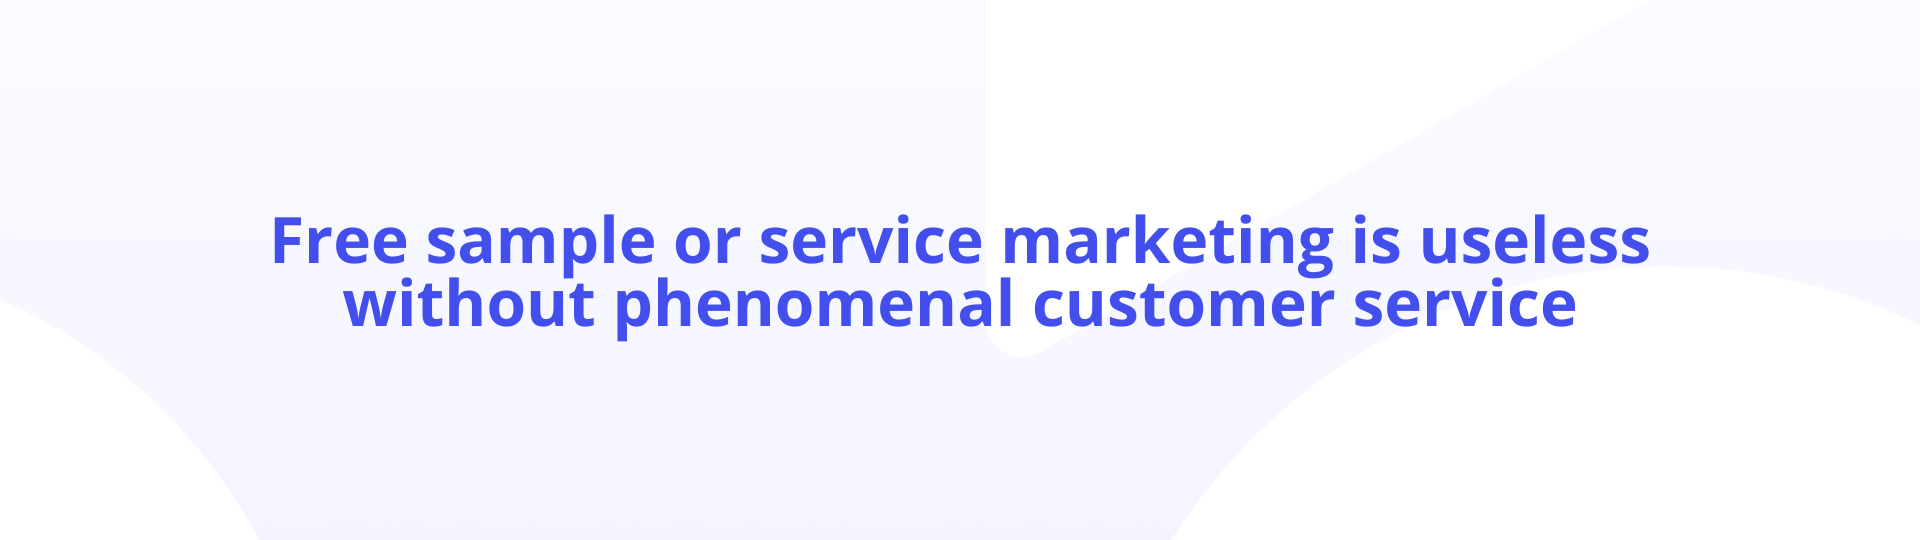 Free sample or service marketing is useless without phenomenal customer service - Agency Jet